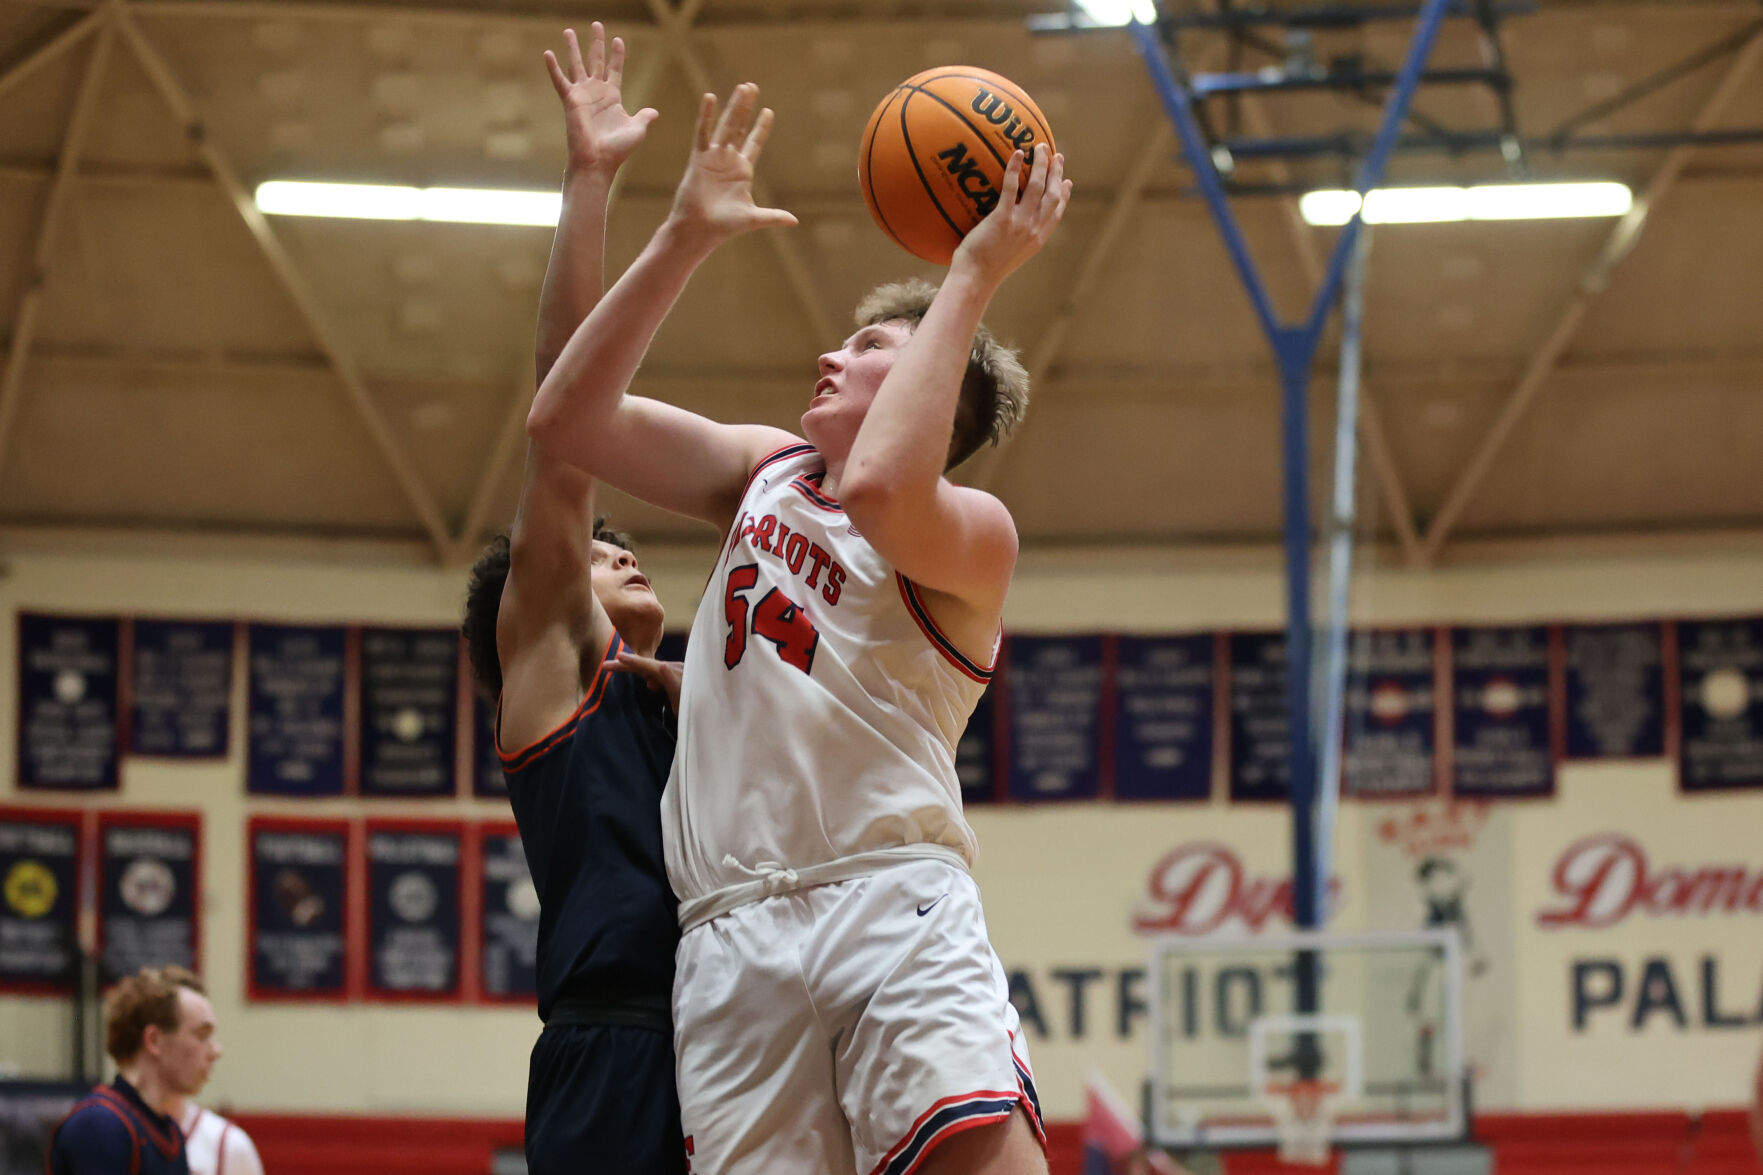 Sullivan East Patriots Secure Victory Over Union Bears: Laisure and Cross Lead the Charge